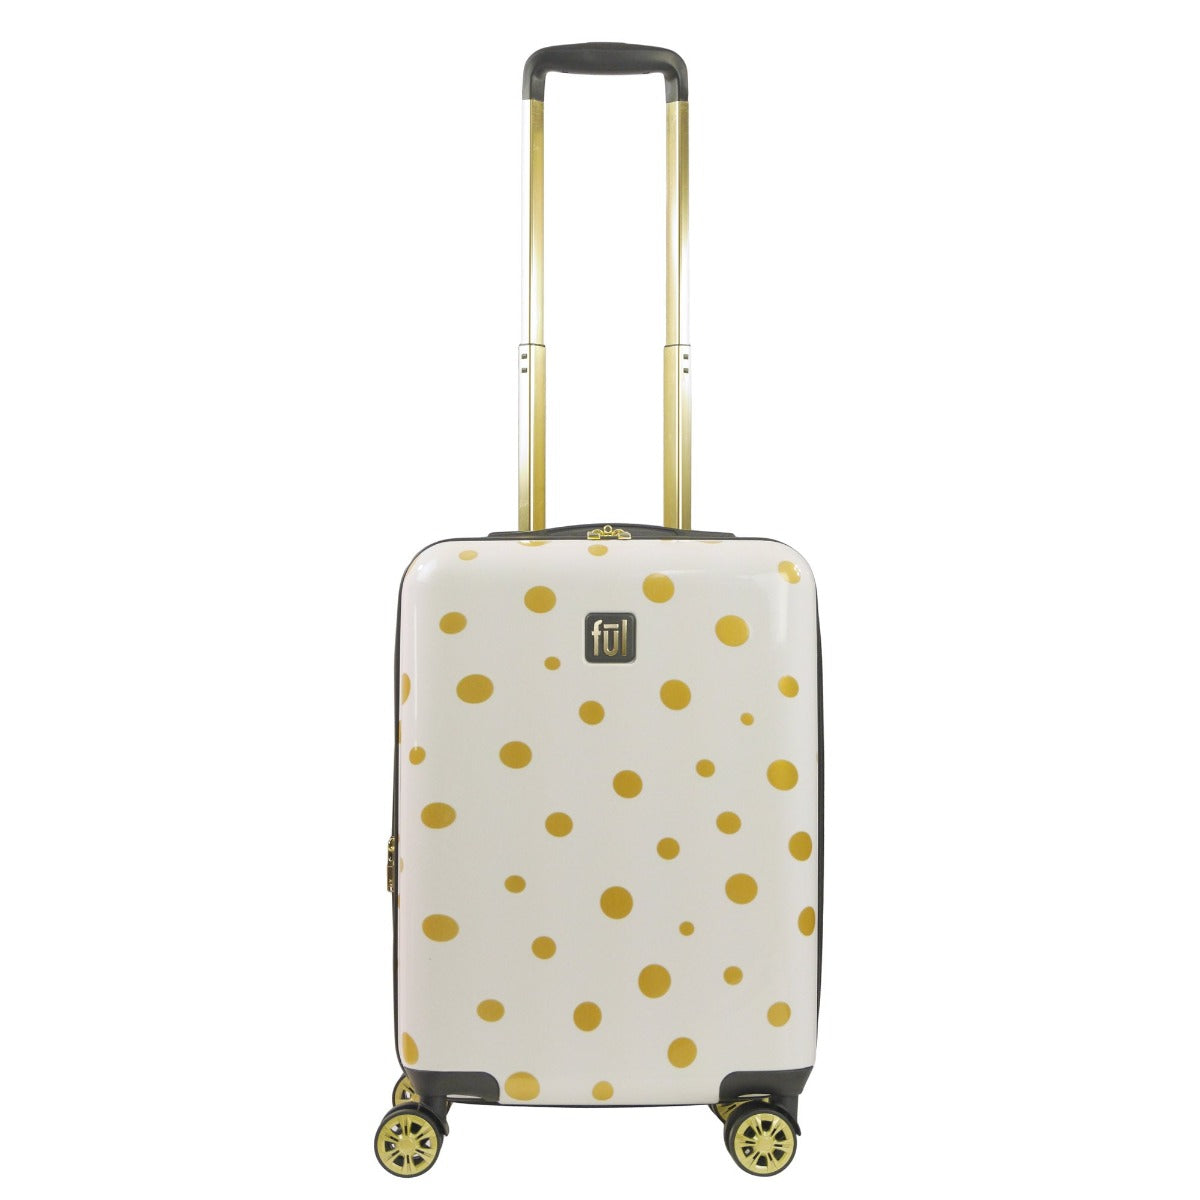 Ful Impulse Mixed Dots hardside spinner 22 inch carry-on luggage white gold suitcase